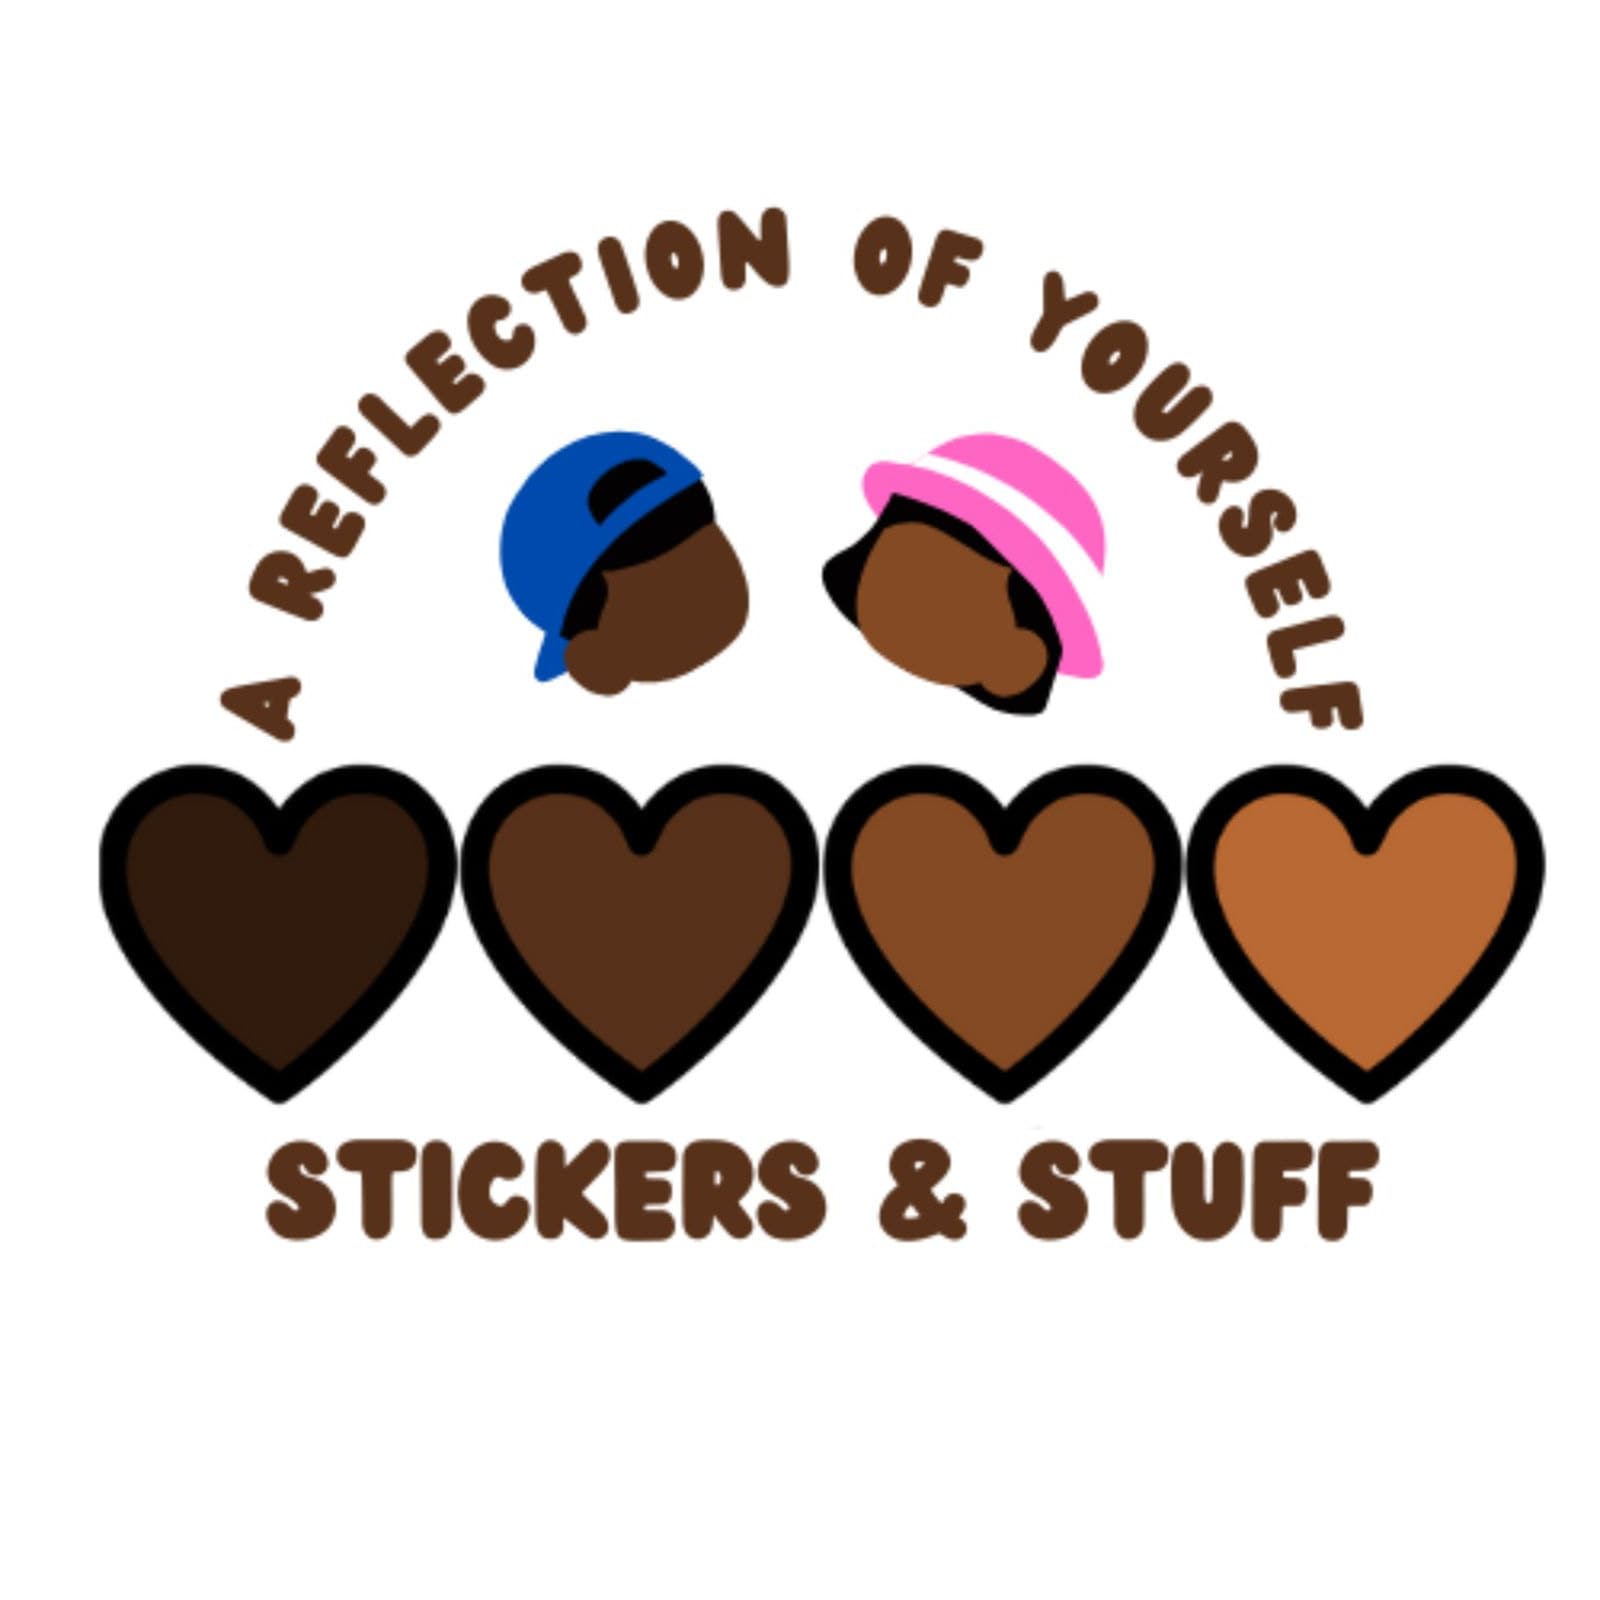 Stickers are My love Language Reusable Sticker Book